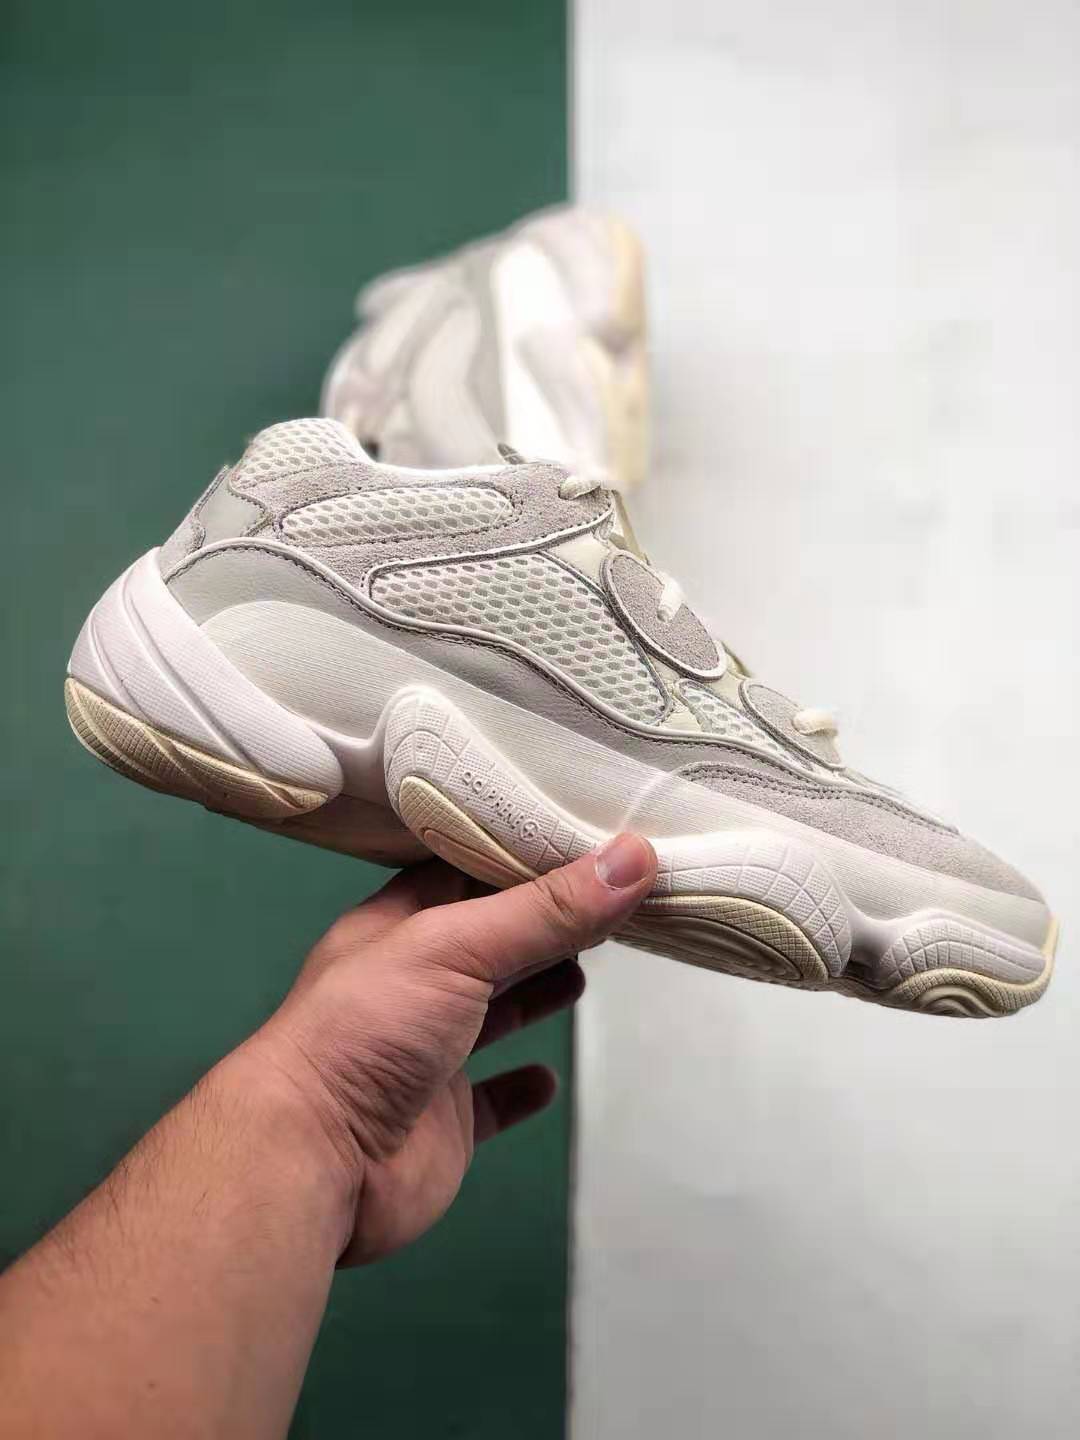 Adidas Yeezy 500 'Bone White' FV3573 - Shop the Latest Release Today!